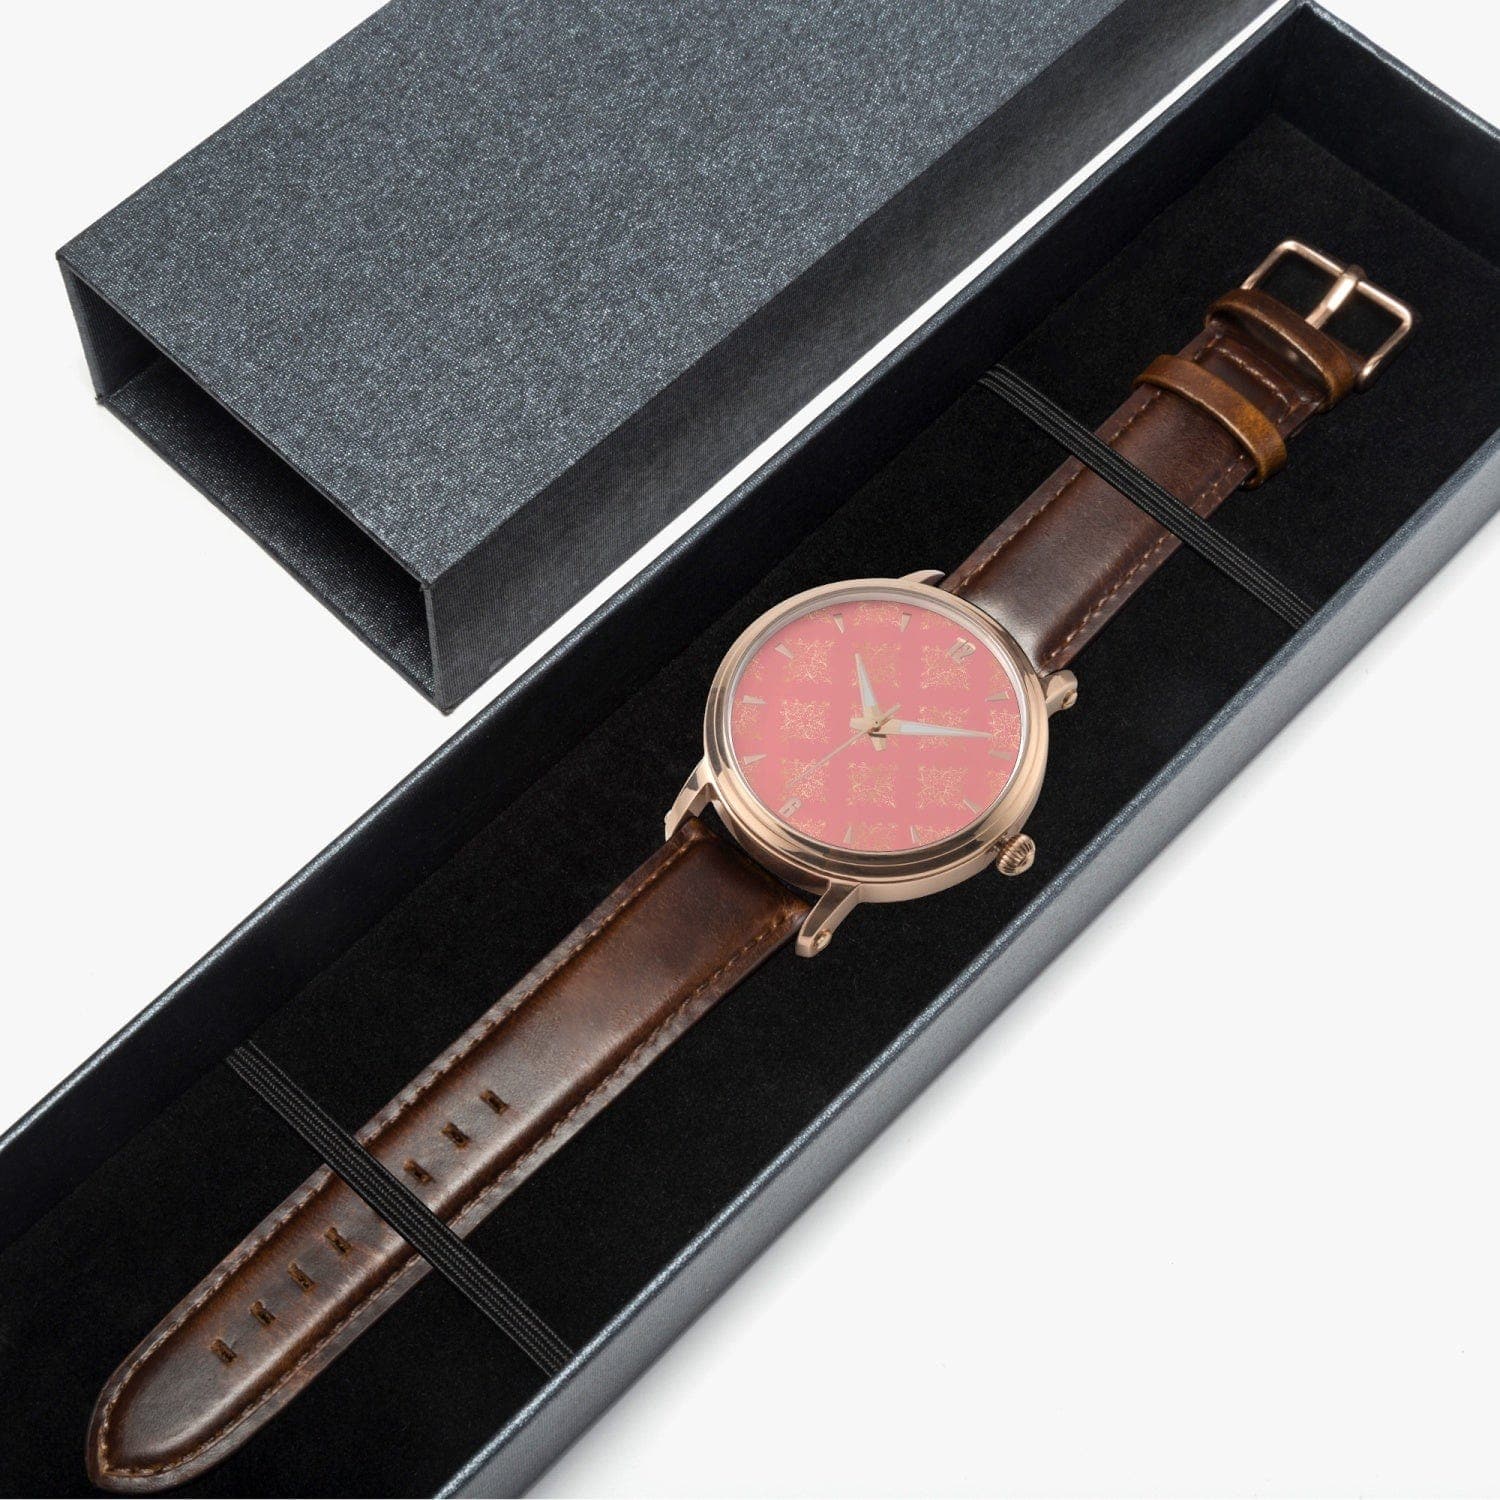 Rose and Gold Damask Patterned Collection II -. 46mm Unisex Automatic Watch (Rose Gold)